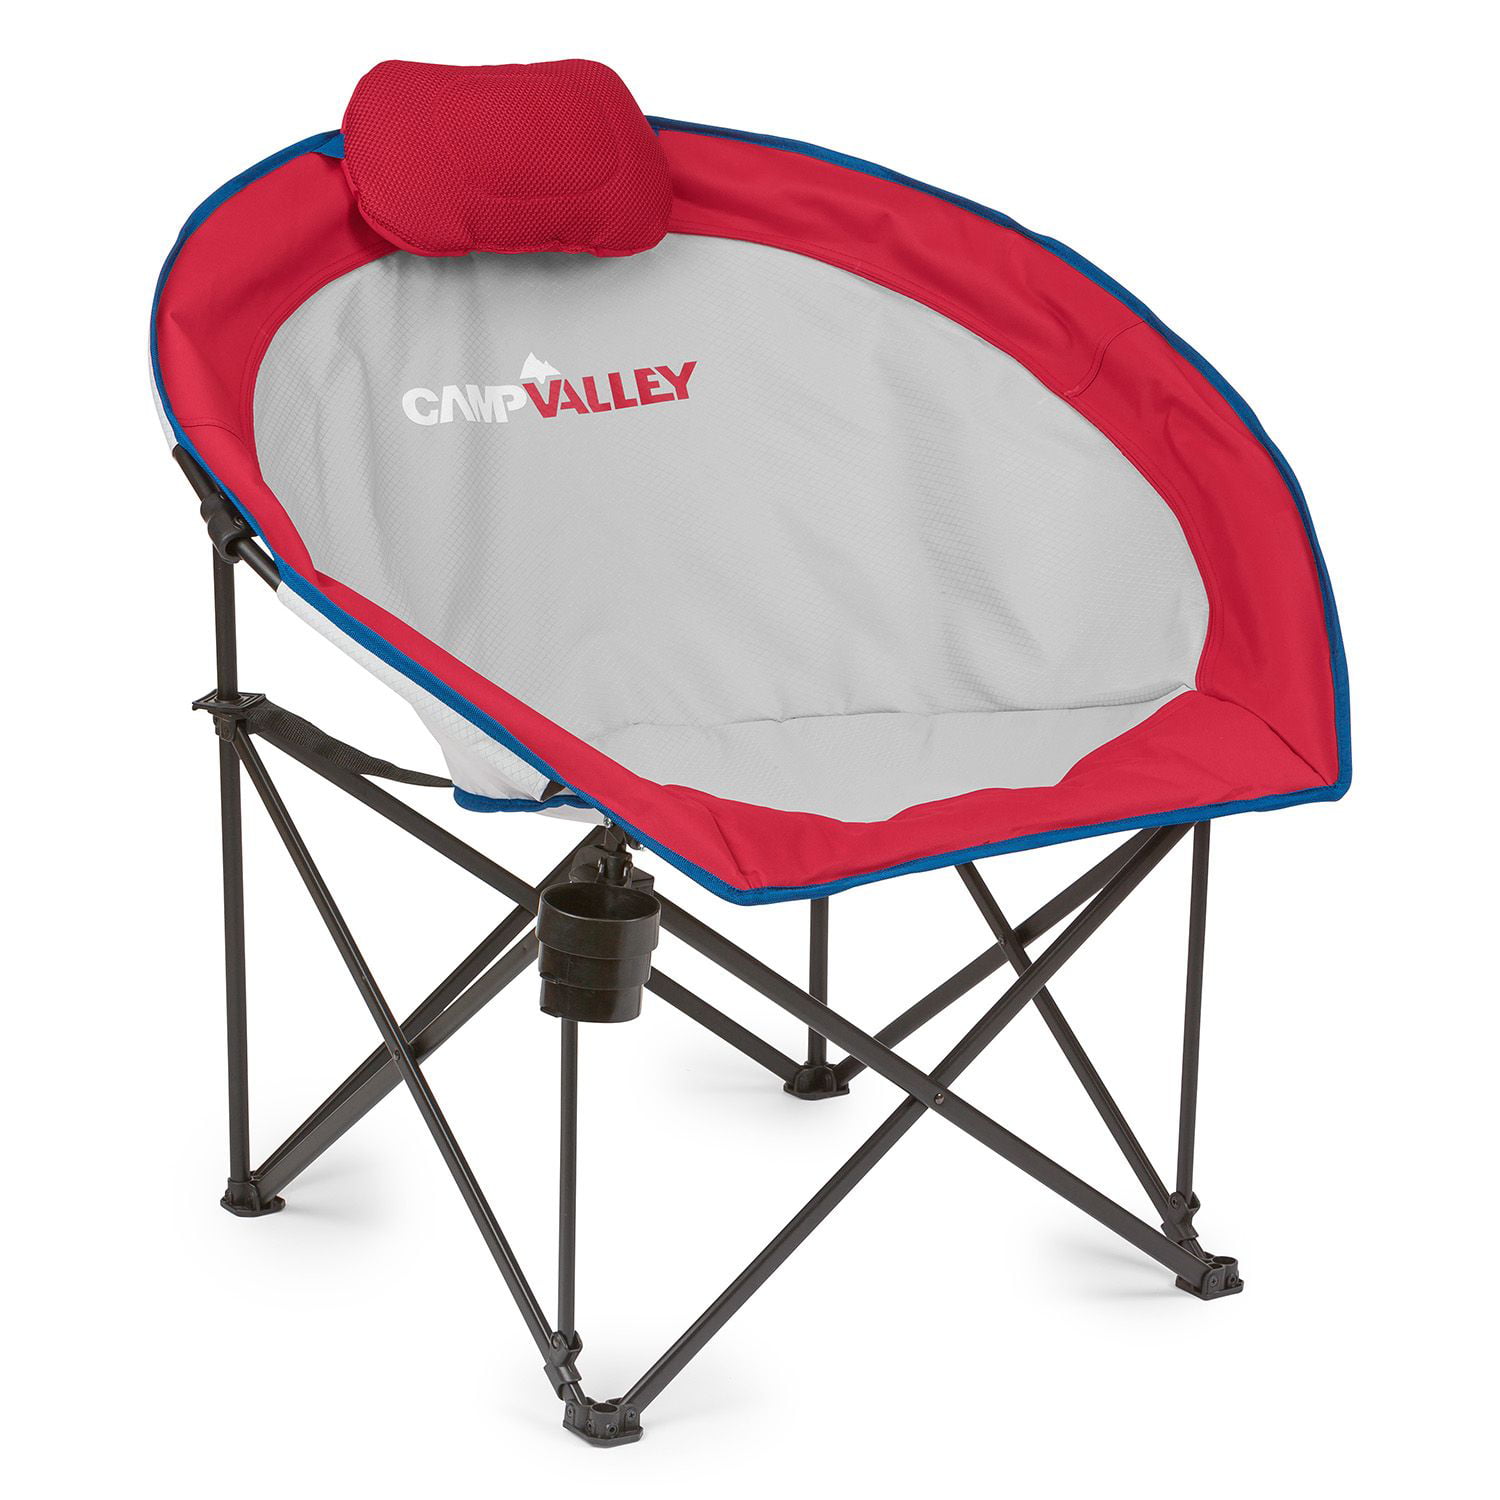 Campvalley Oversized Round Camp Chair 